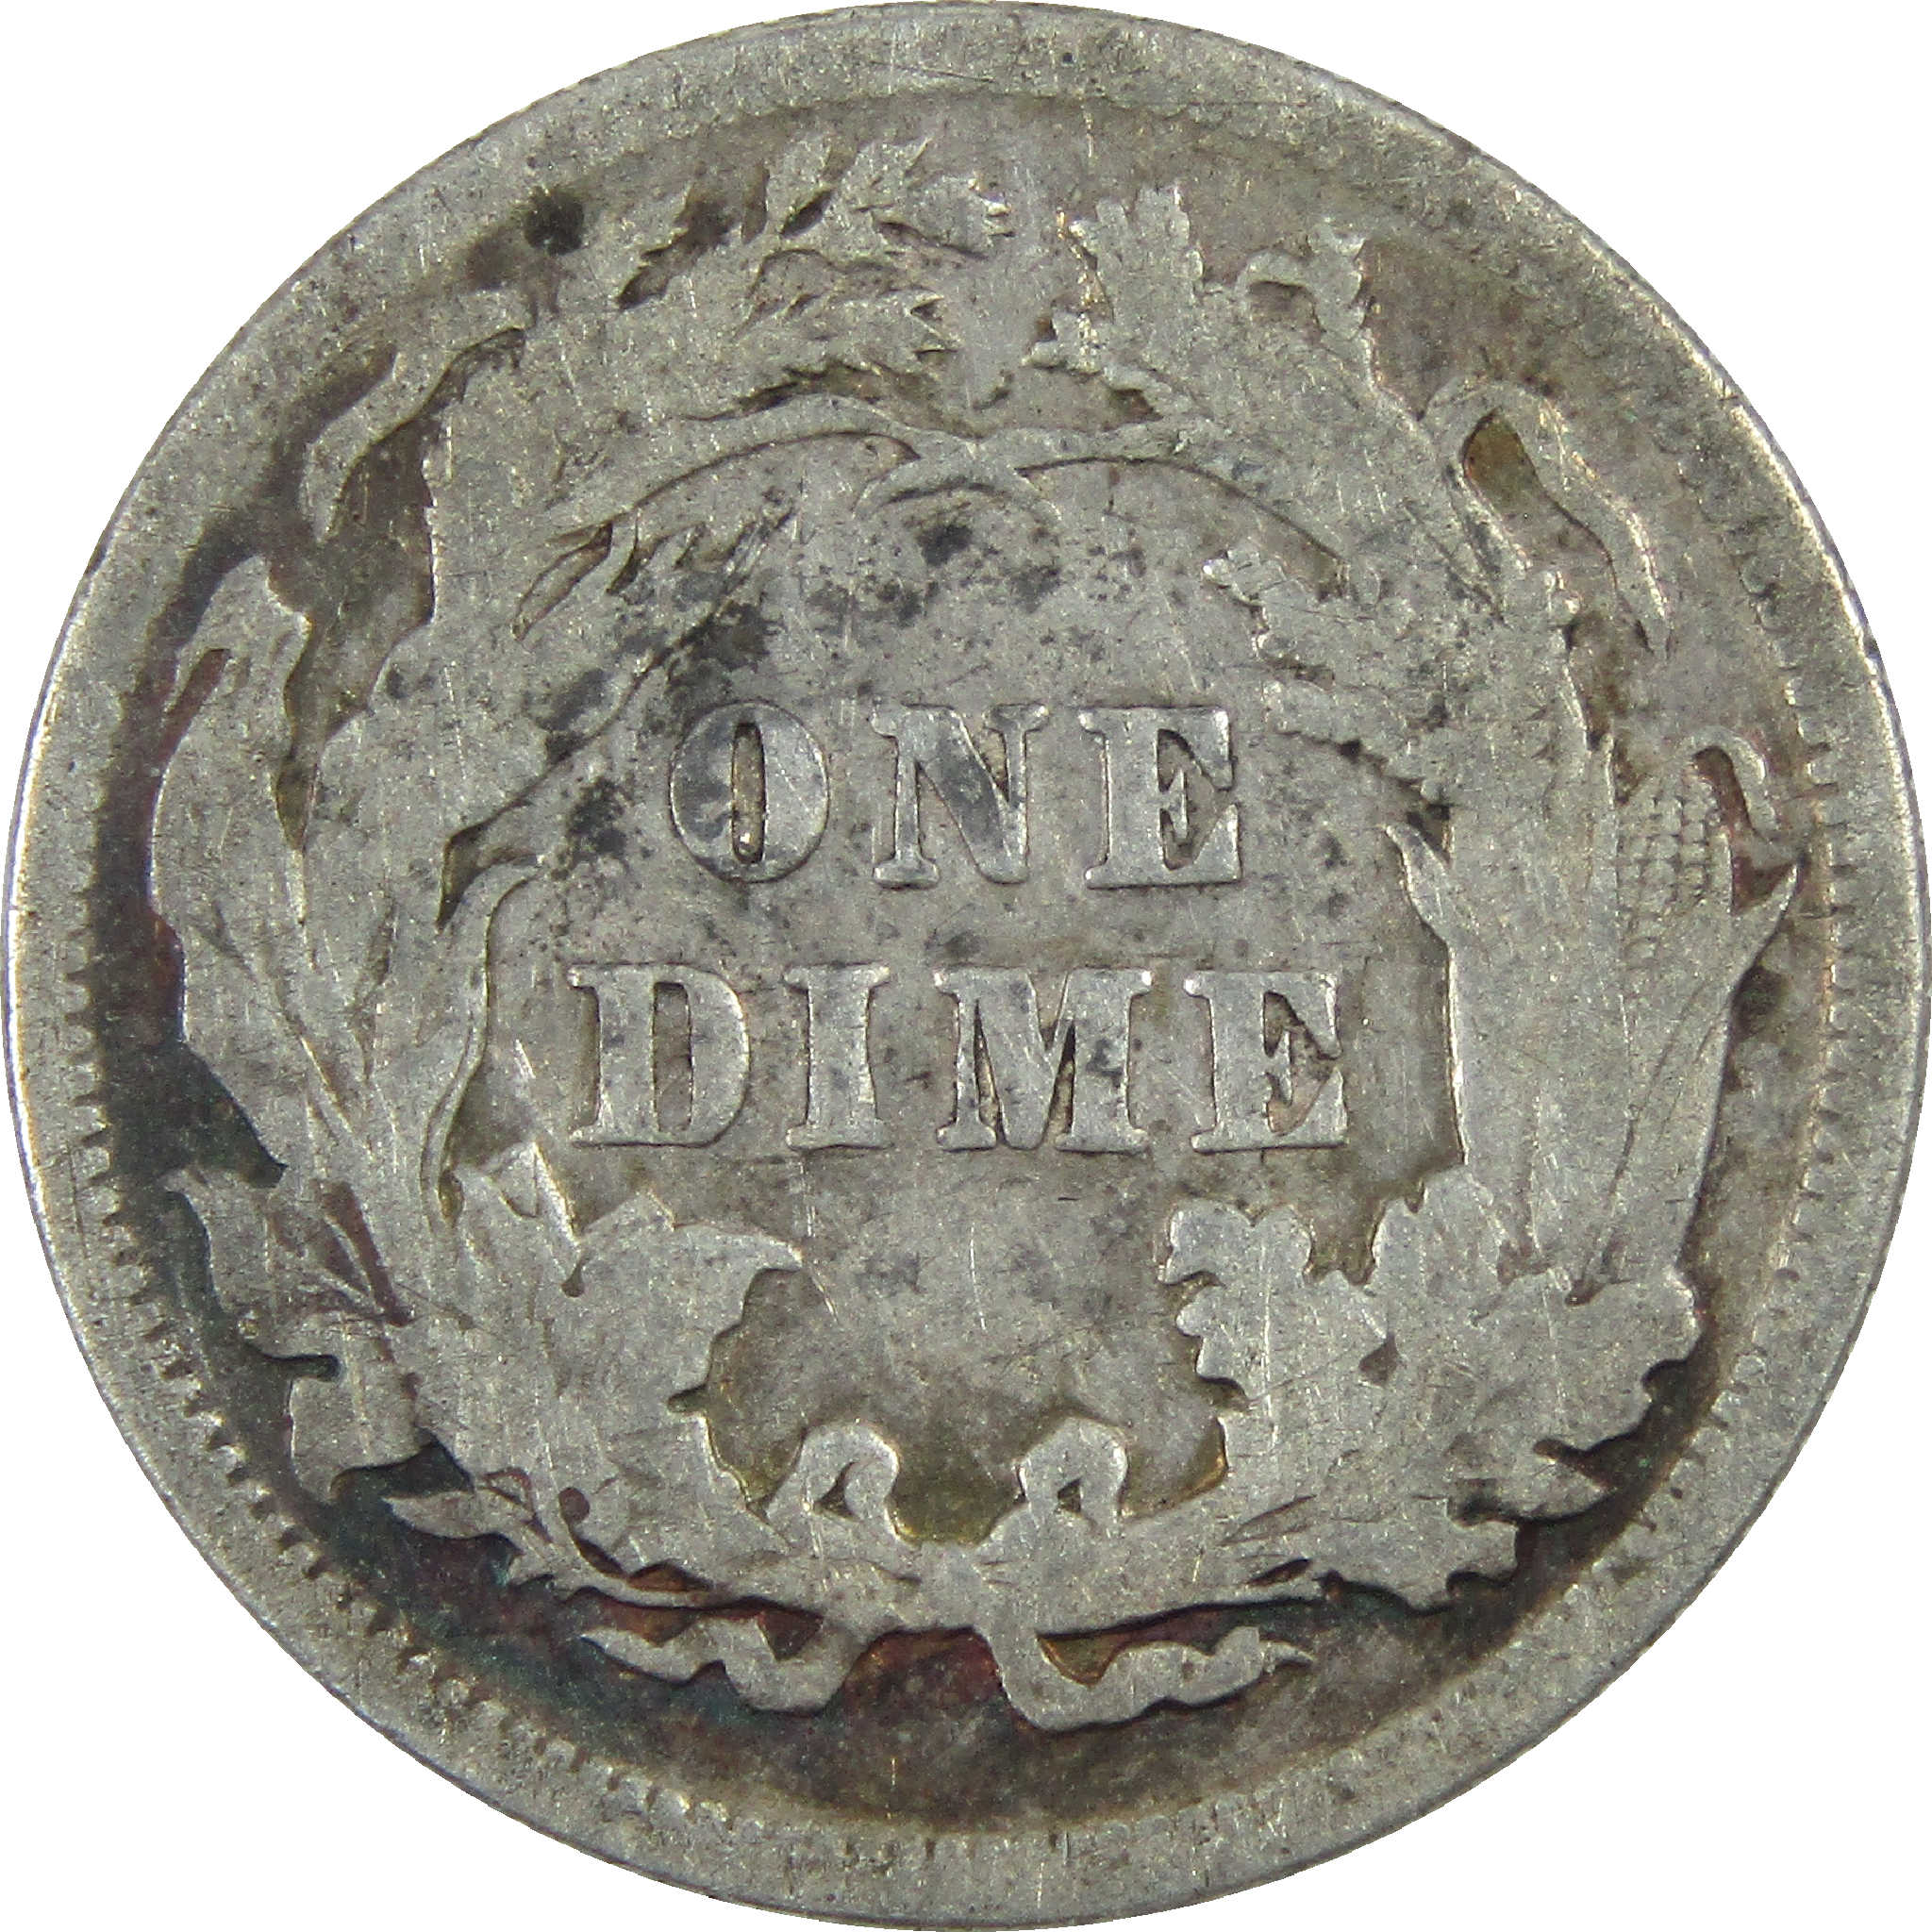 1891 Seated Liberty Dime VF Very Fine Silver 10c Coin SKU:I12271